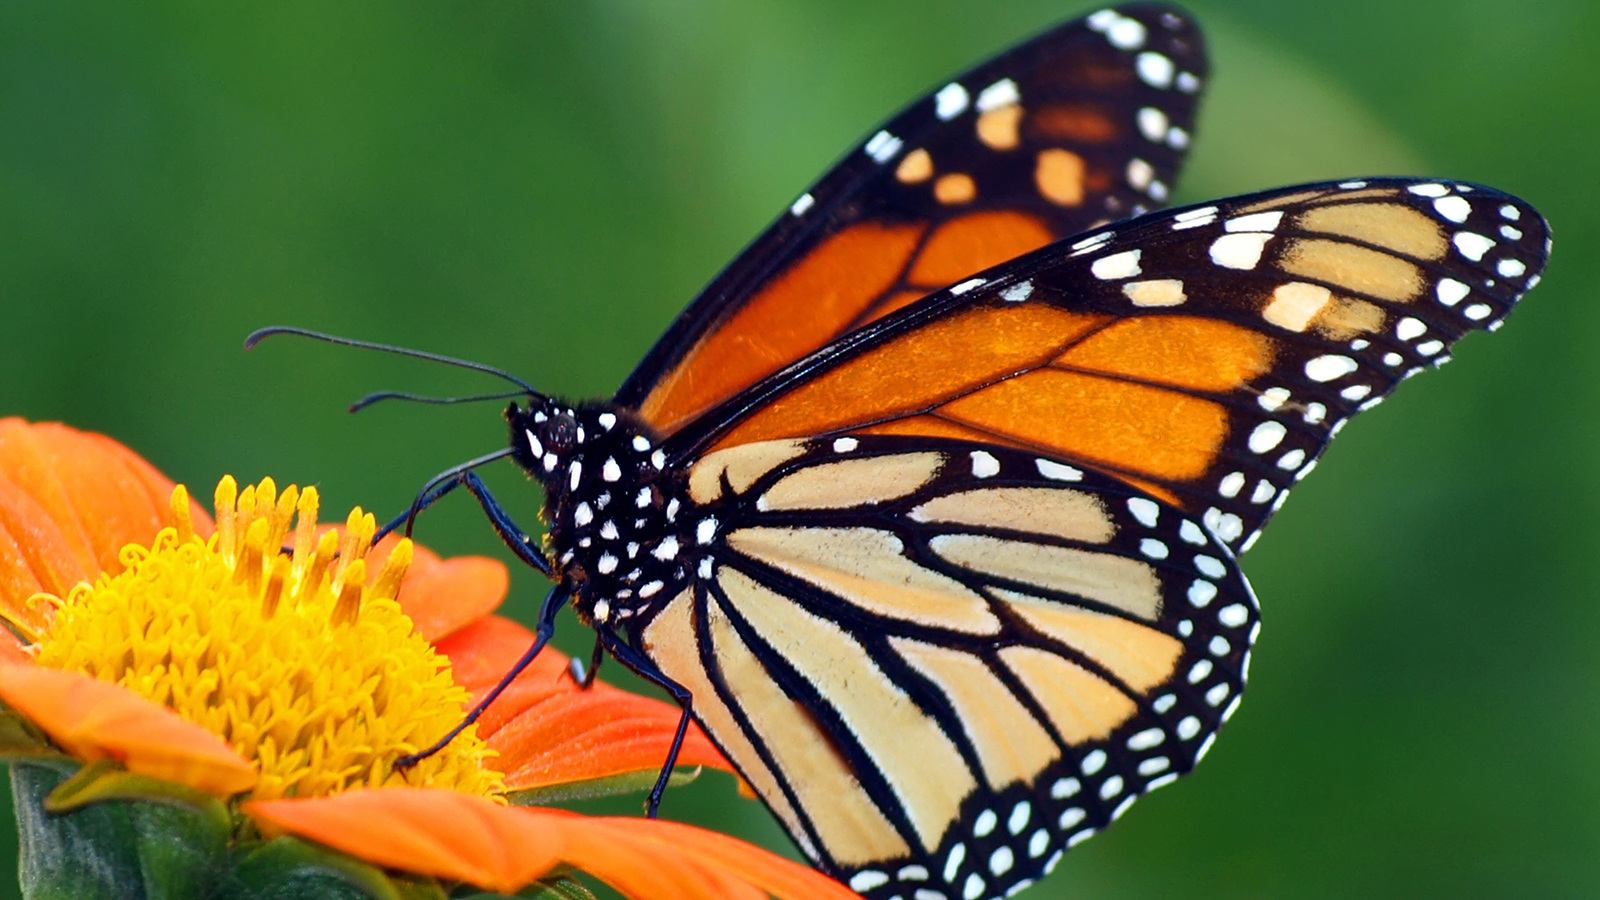 Nibley residents want to protect the monarch butterfly population from insecticide spraying.